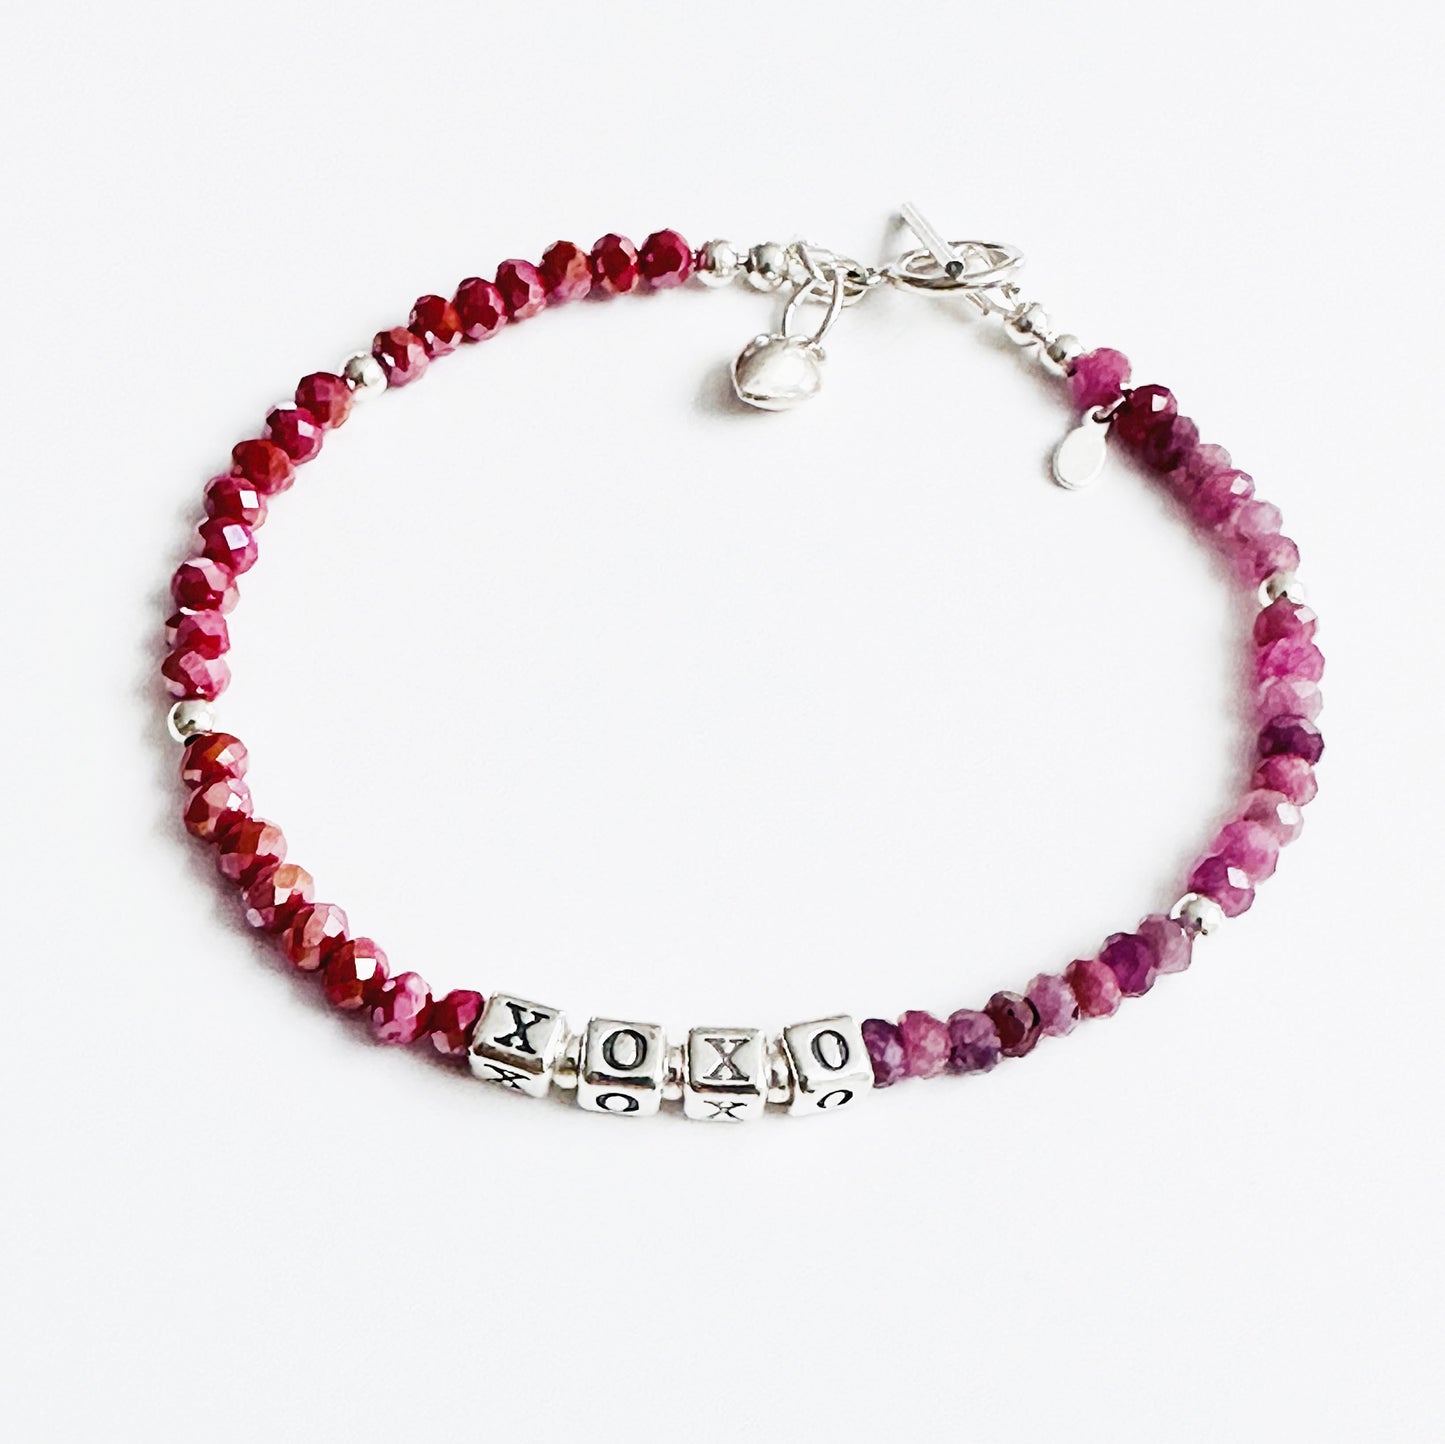 XOXO Hugs and Kisses Love and Friendship bracelet in sterling silver and ruby gemstones